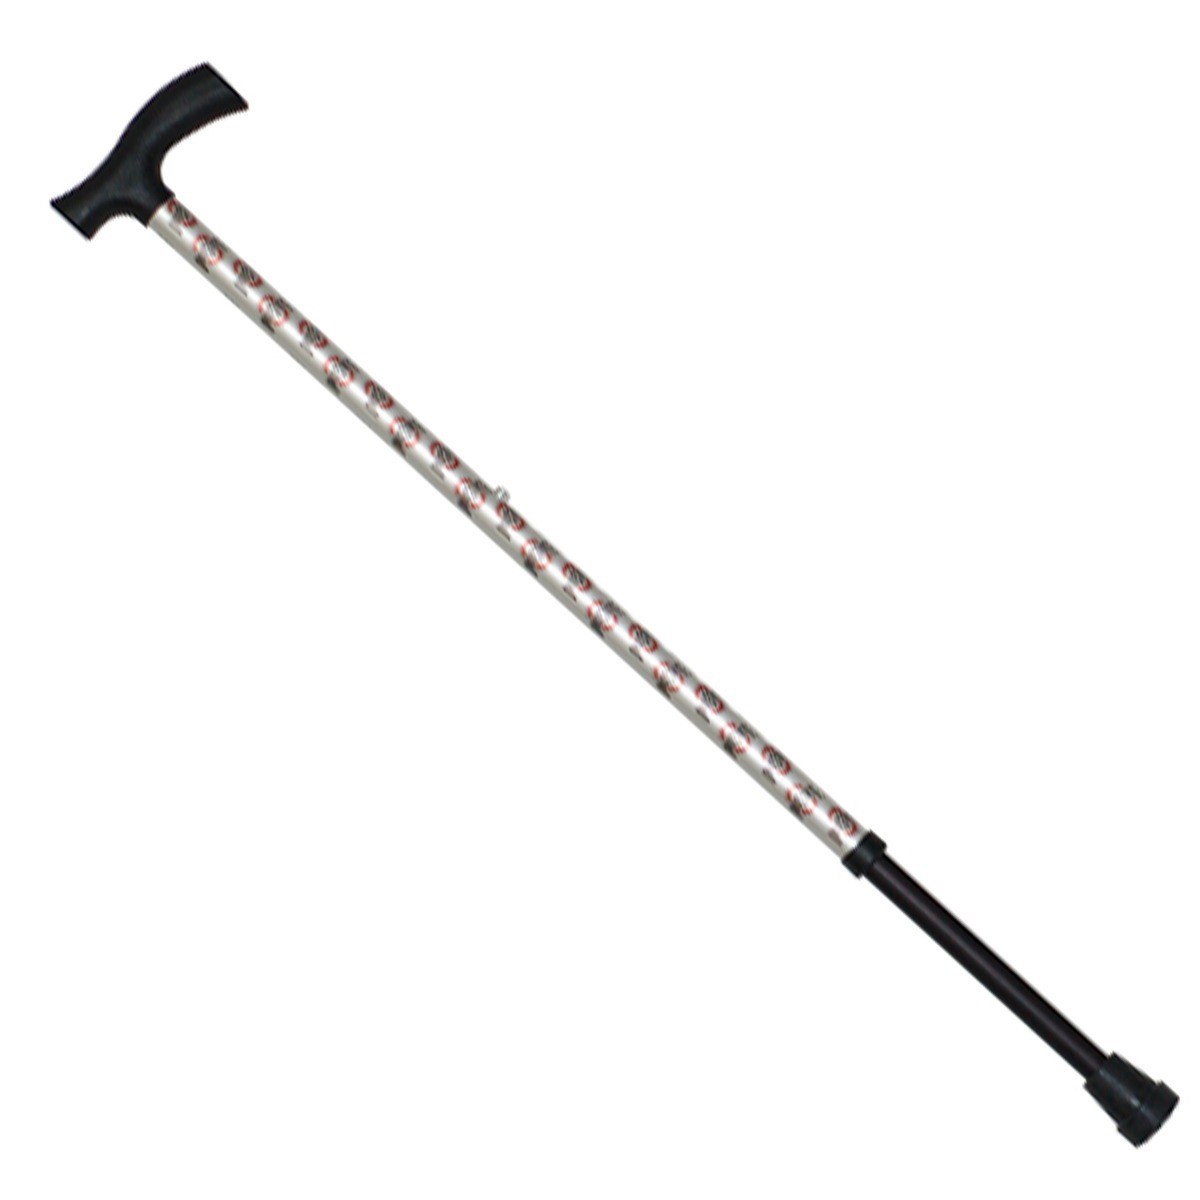 Adjustable walking cane College Traditions Columbus (614)291-4678